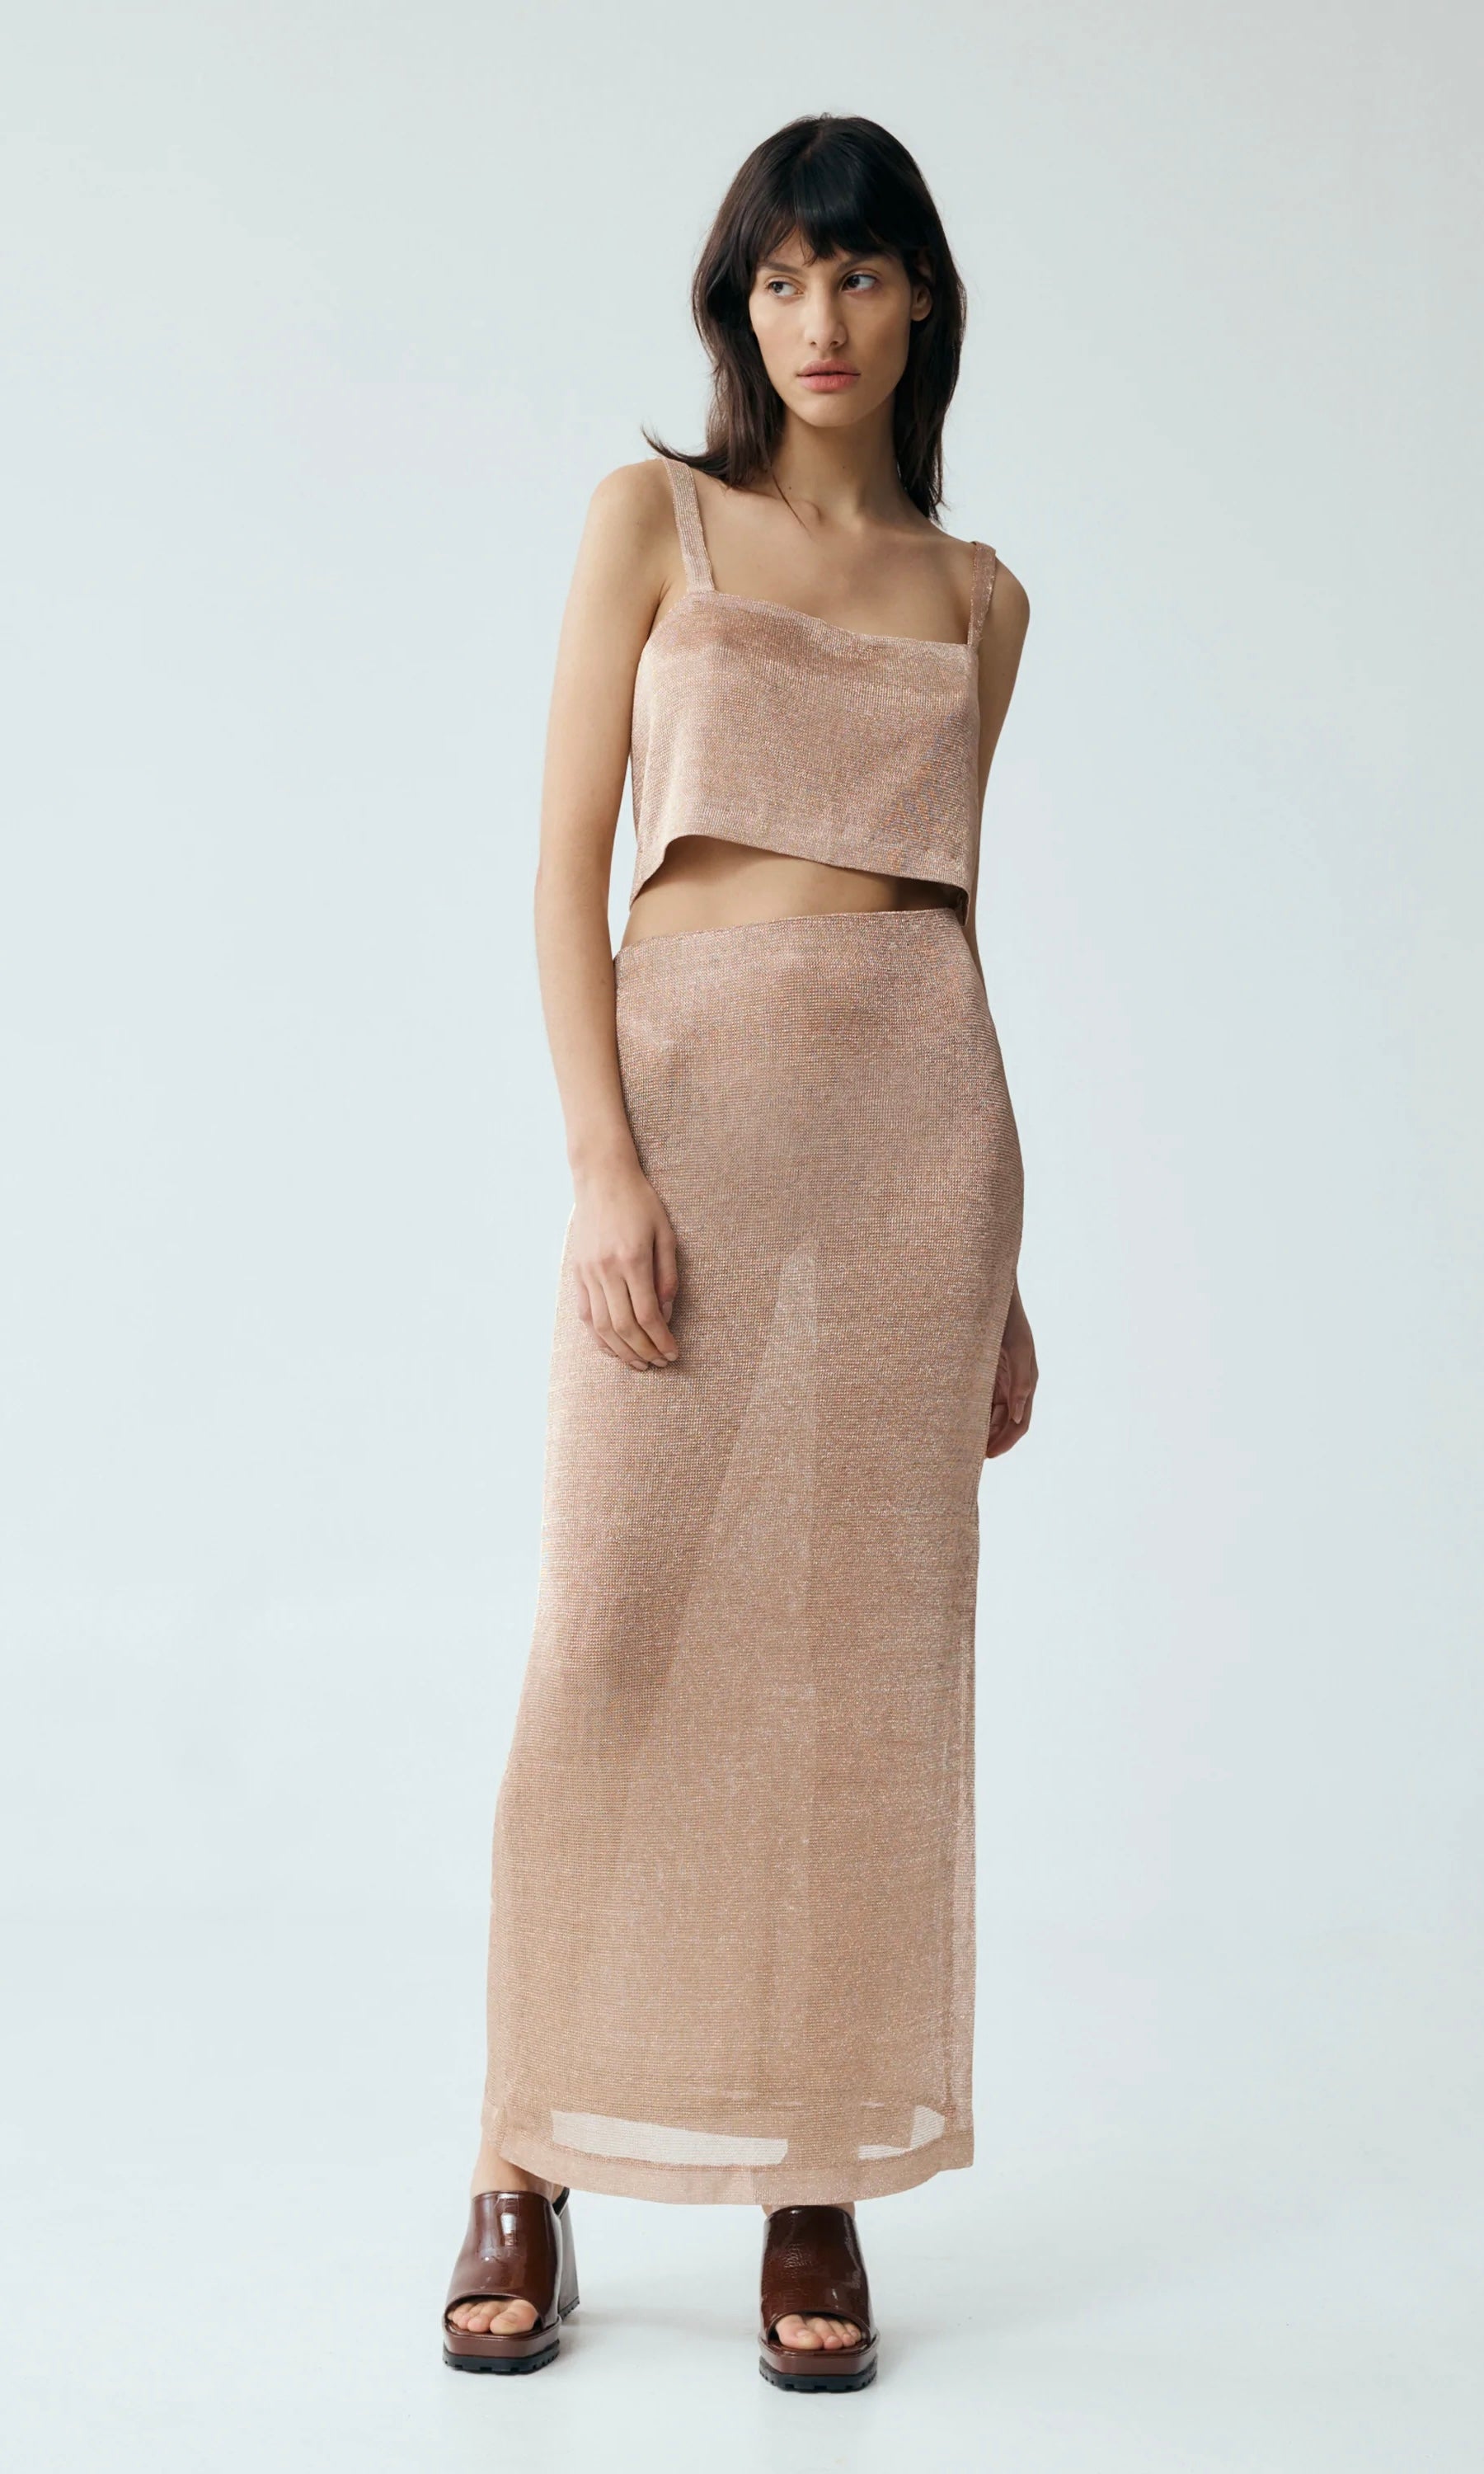 Third Form Heavy Metal Knit Maxi Skirt In Rose Gold